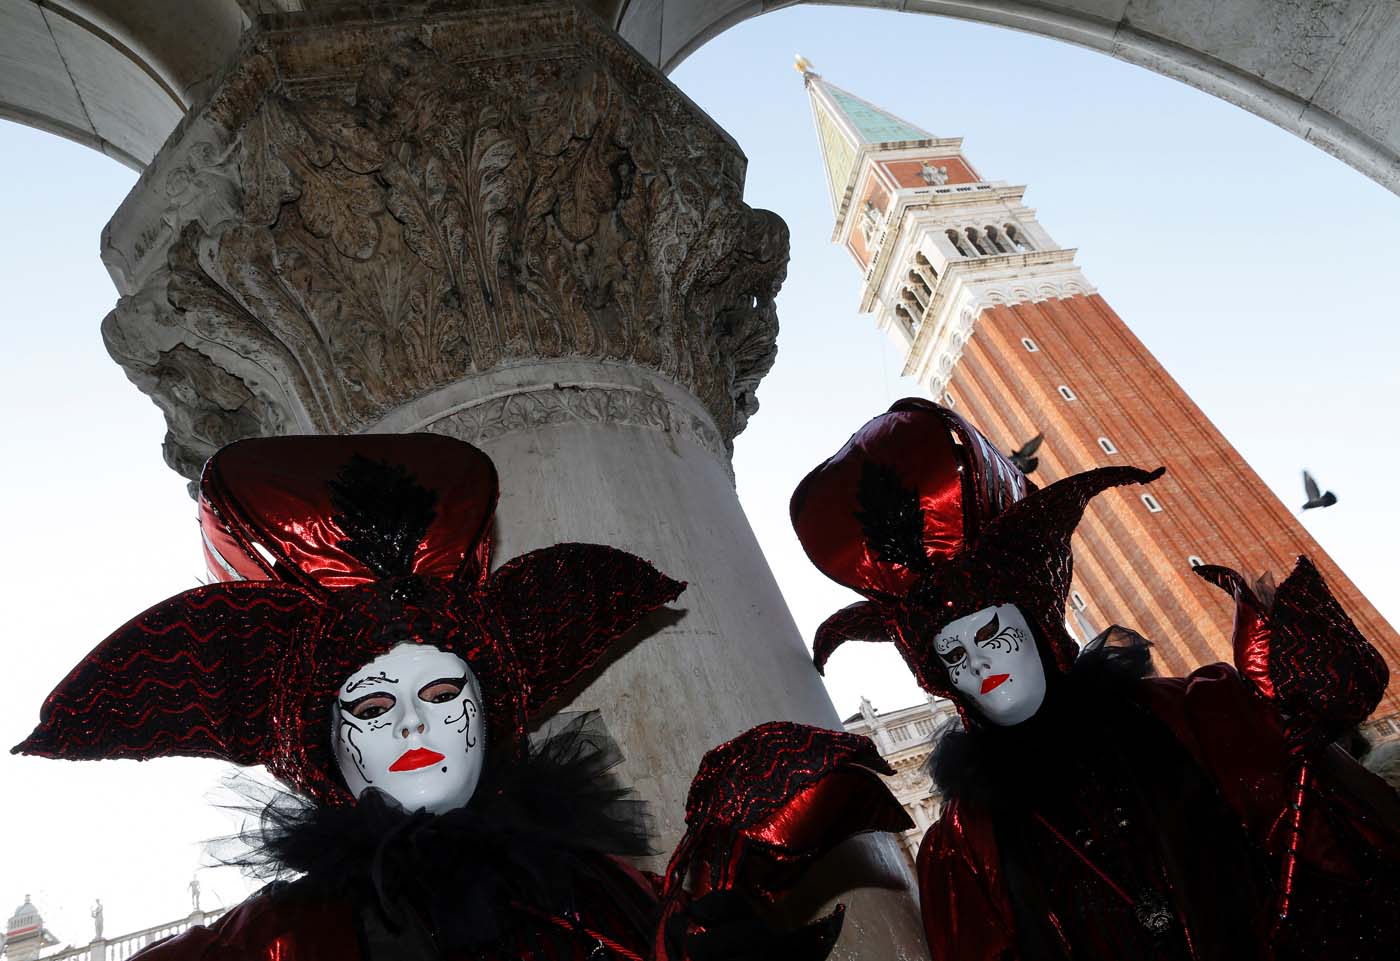 Revellers pose in St. Mark's Square during the Carnival in Venice, Italy February 18, 2017 REUTERS/Alessandro Bianchi